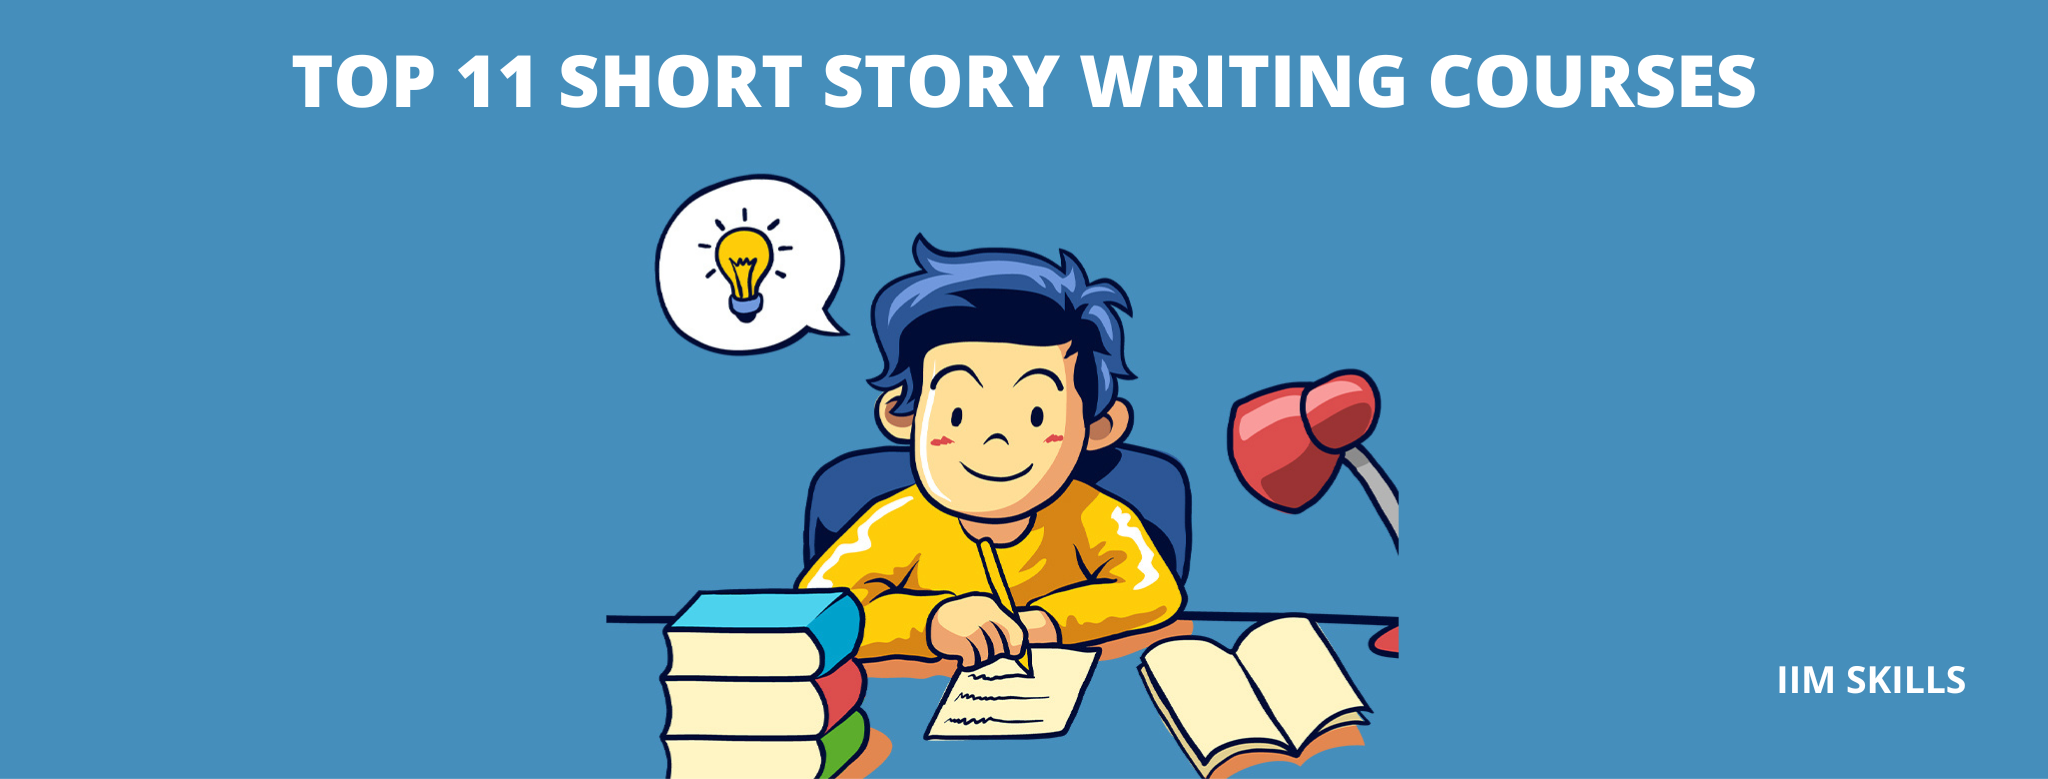 List of best short story writing courses